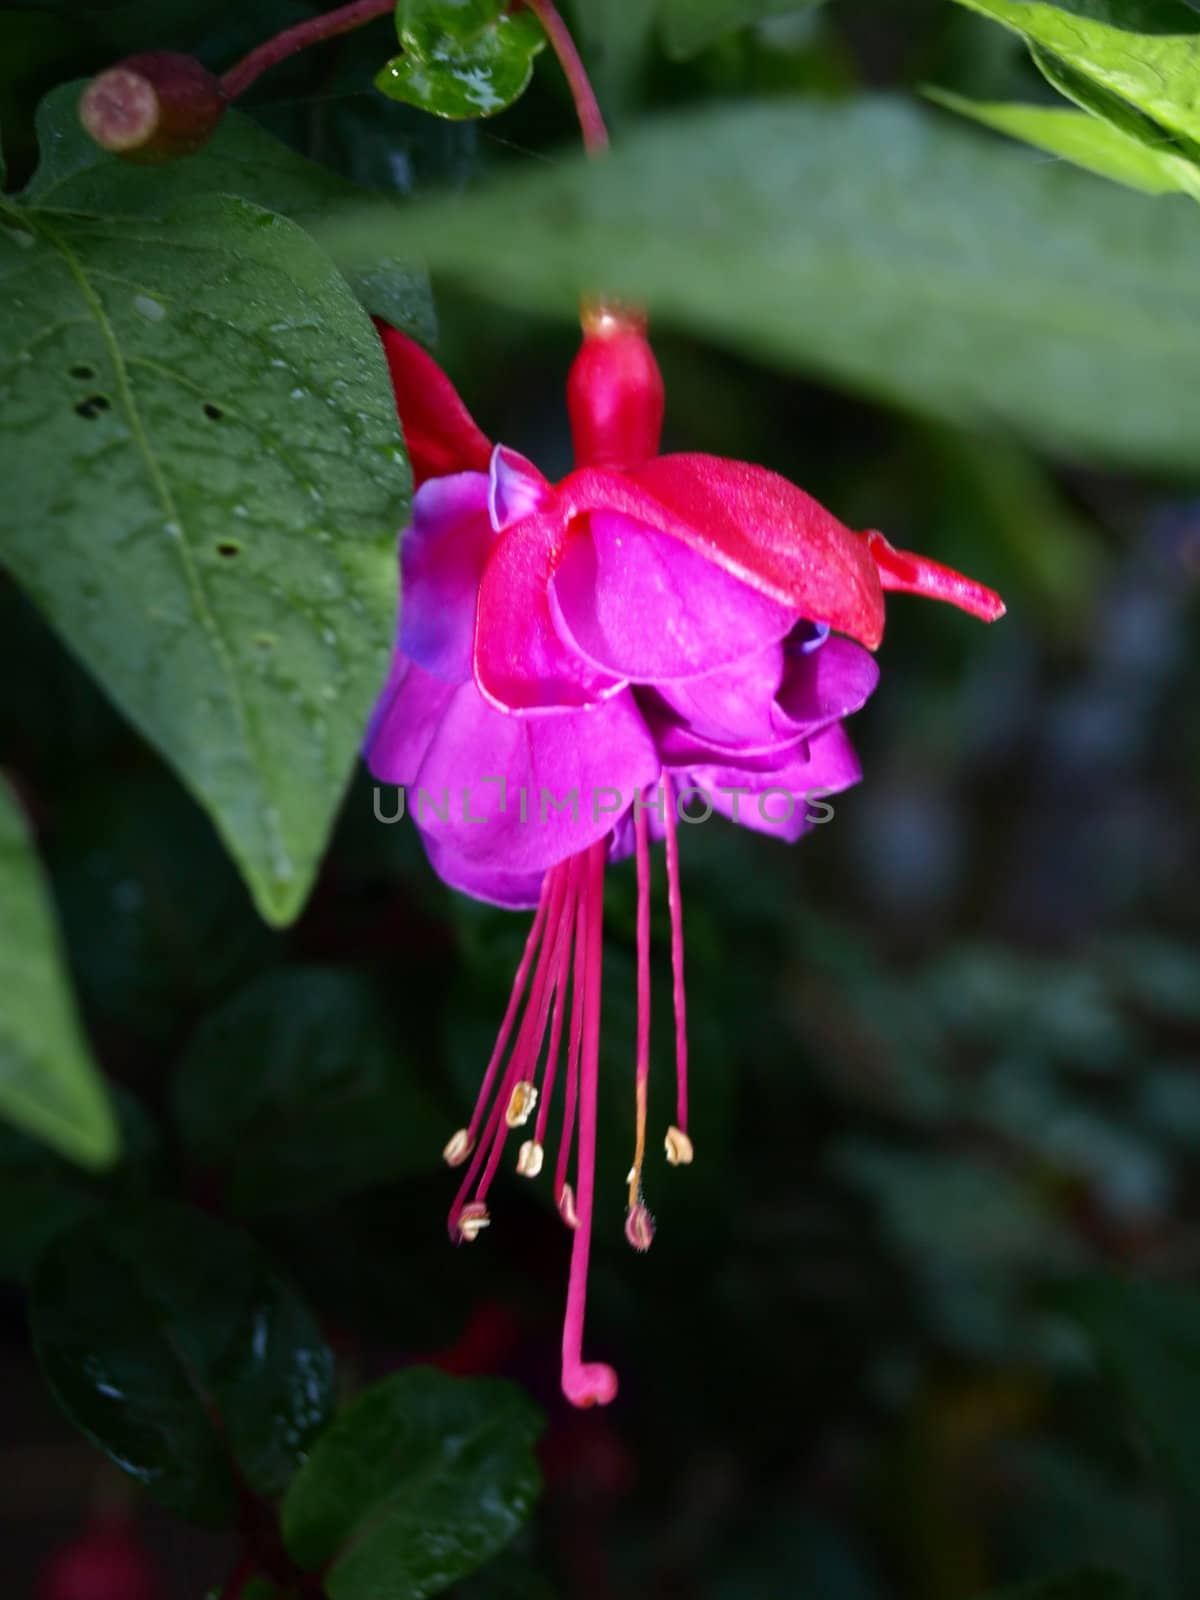 A beautiful pink fuchsia blossom growing outside in a garden.